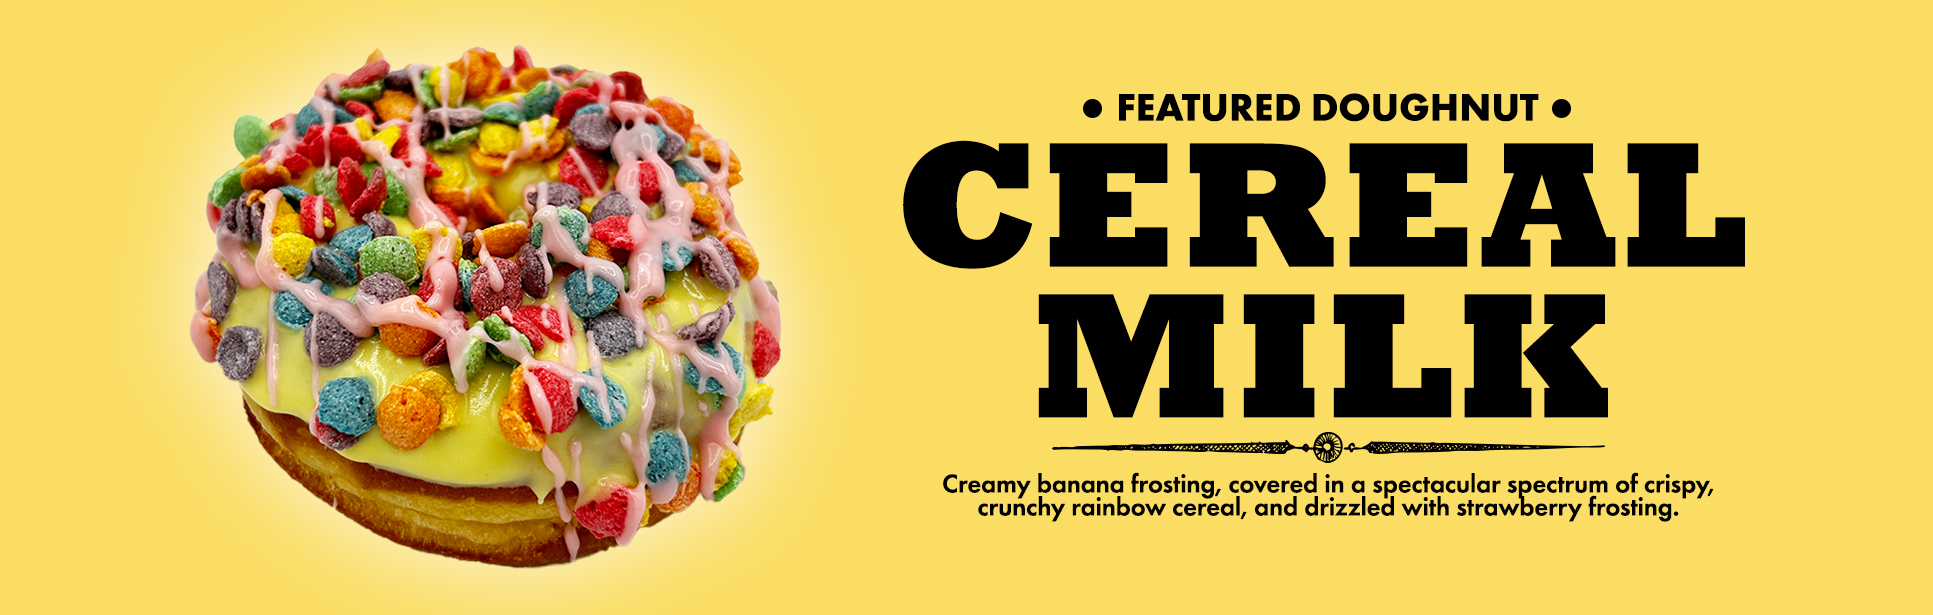 Cereal Milk Doughnut with banana frosting and rainbow cereal with a strawberry frosting drizzle